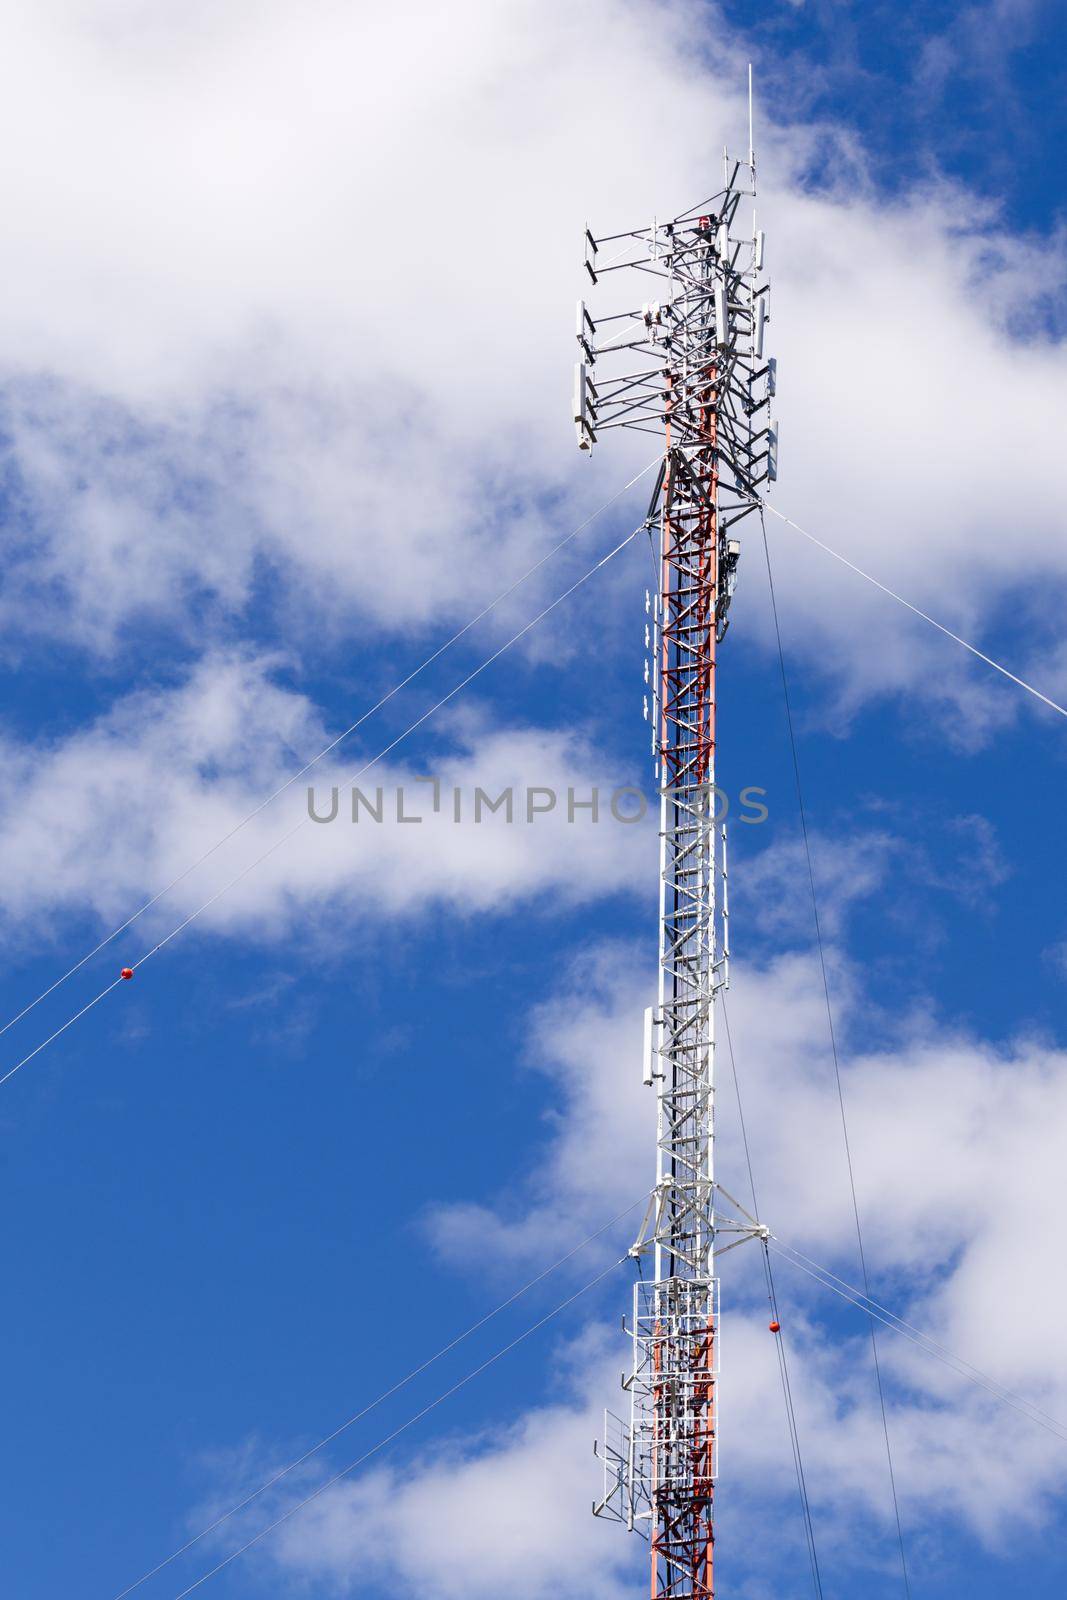 Metal lattice truss tower with telecommunication antennas against clouds and blue sky